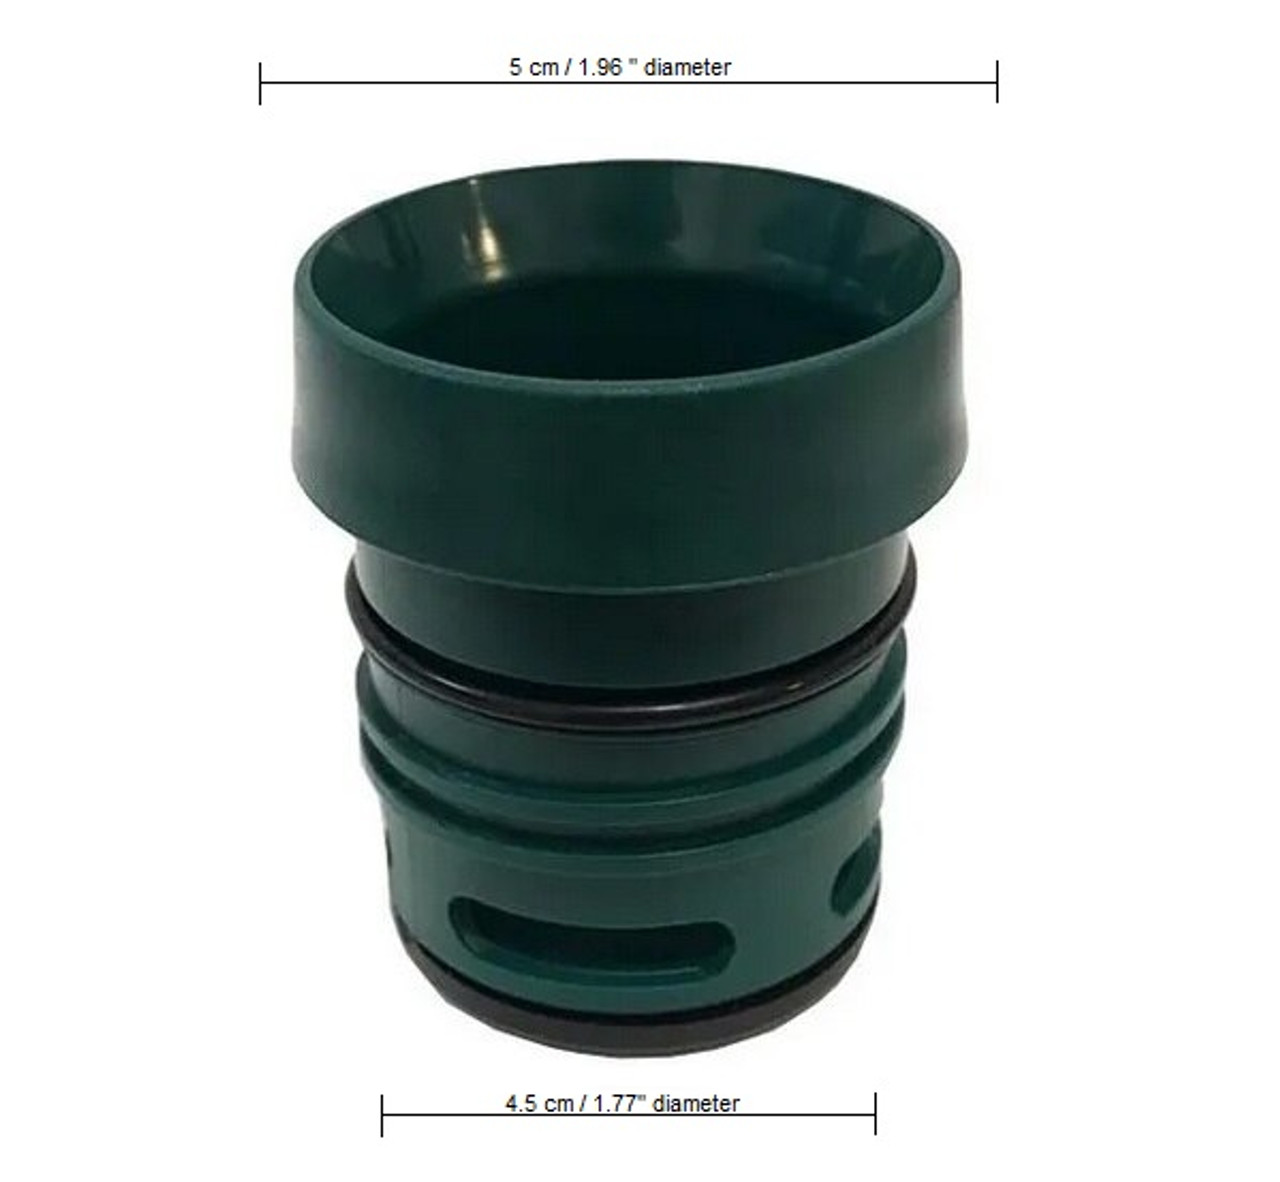 Classic Stopper Replacement for Stanley Thermos Repuesto Matero